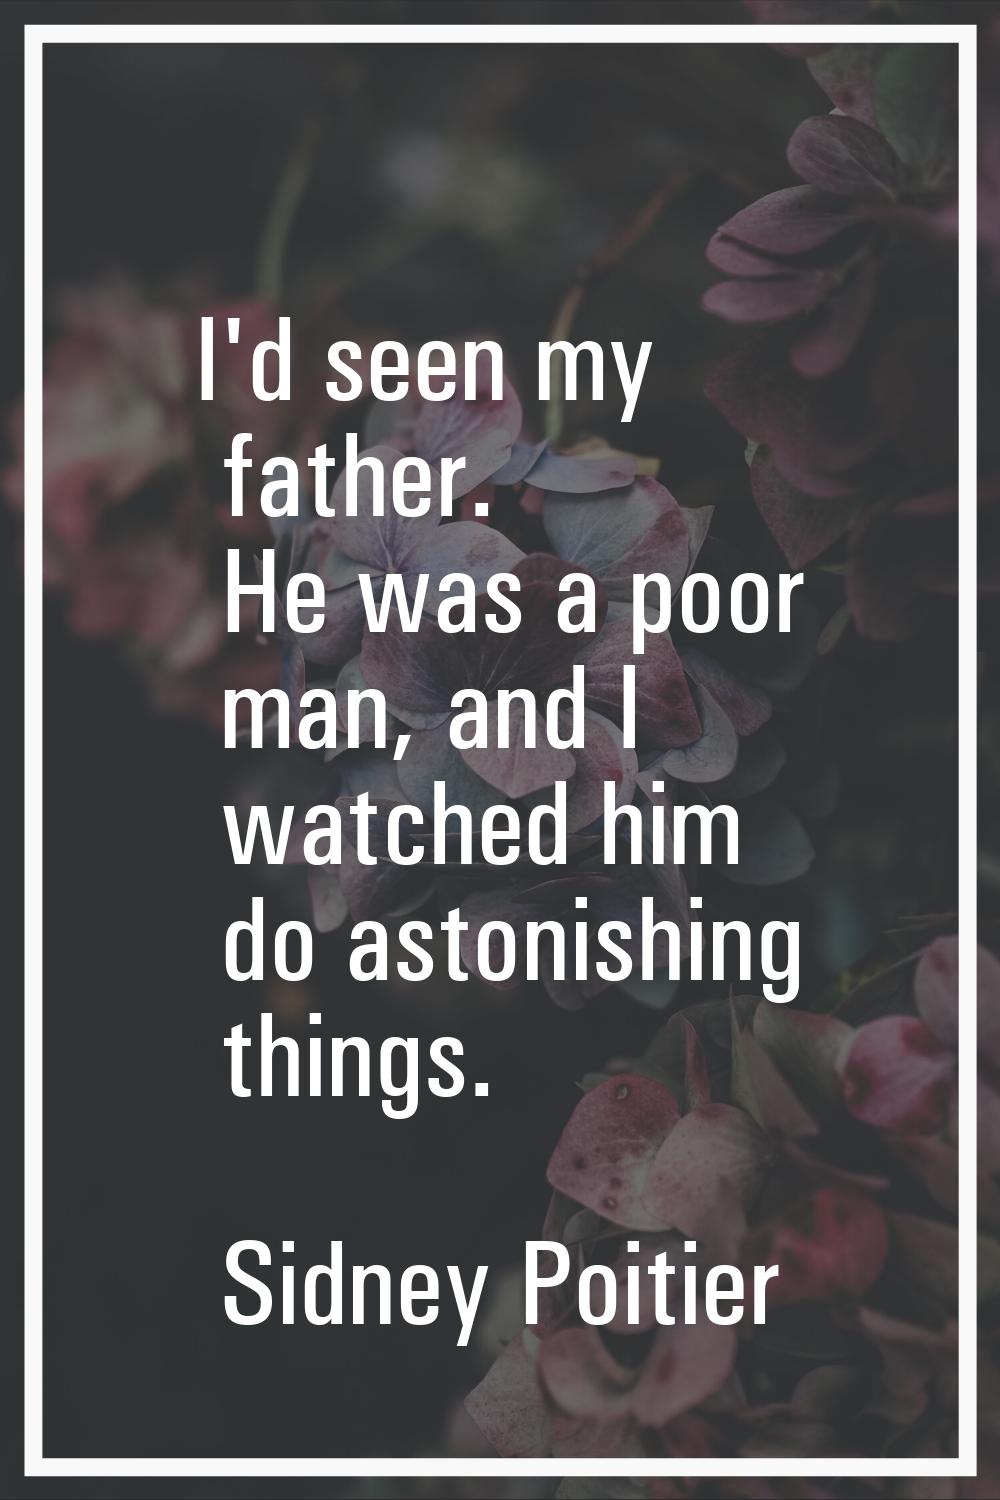 I'd seen my father. He was a poor man, and I watched him do astonishing things.